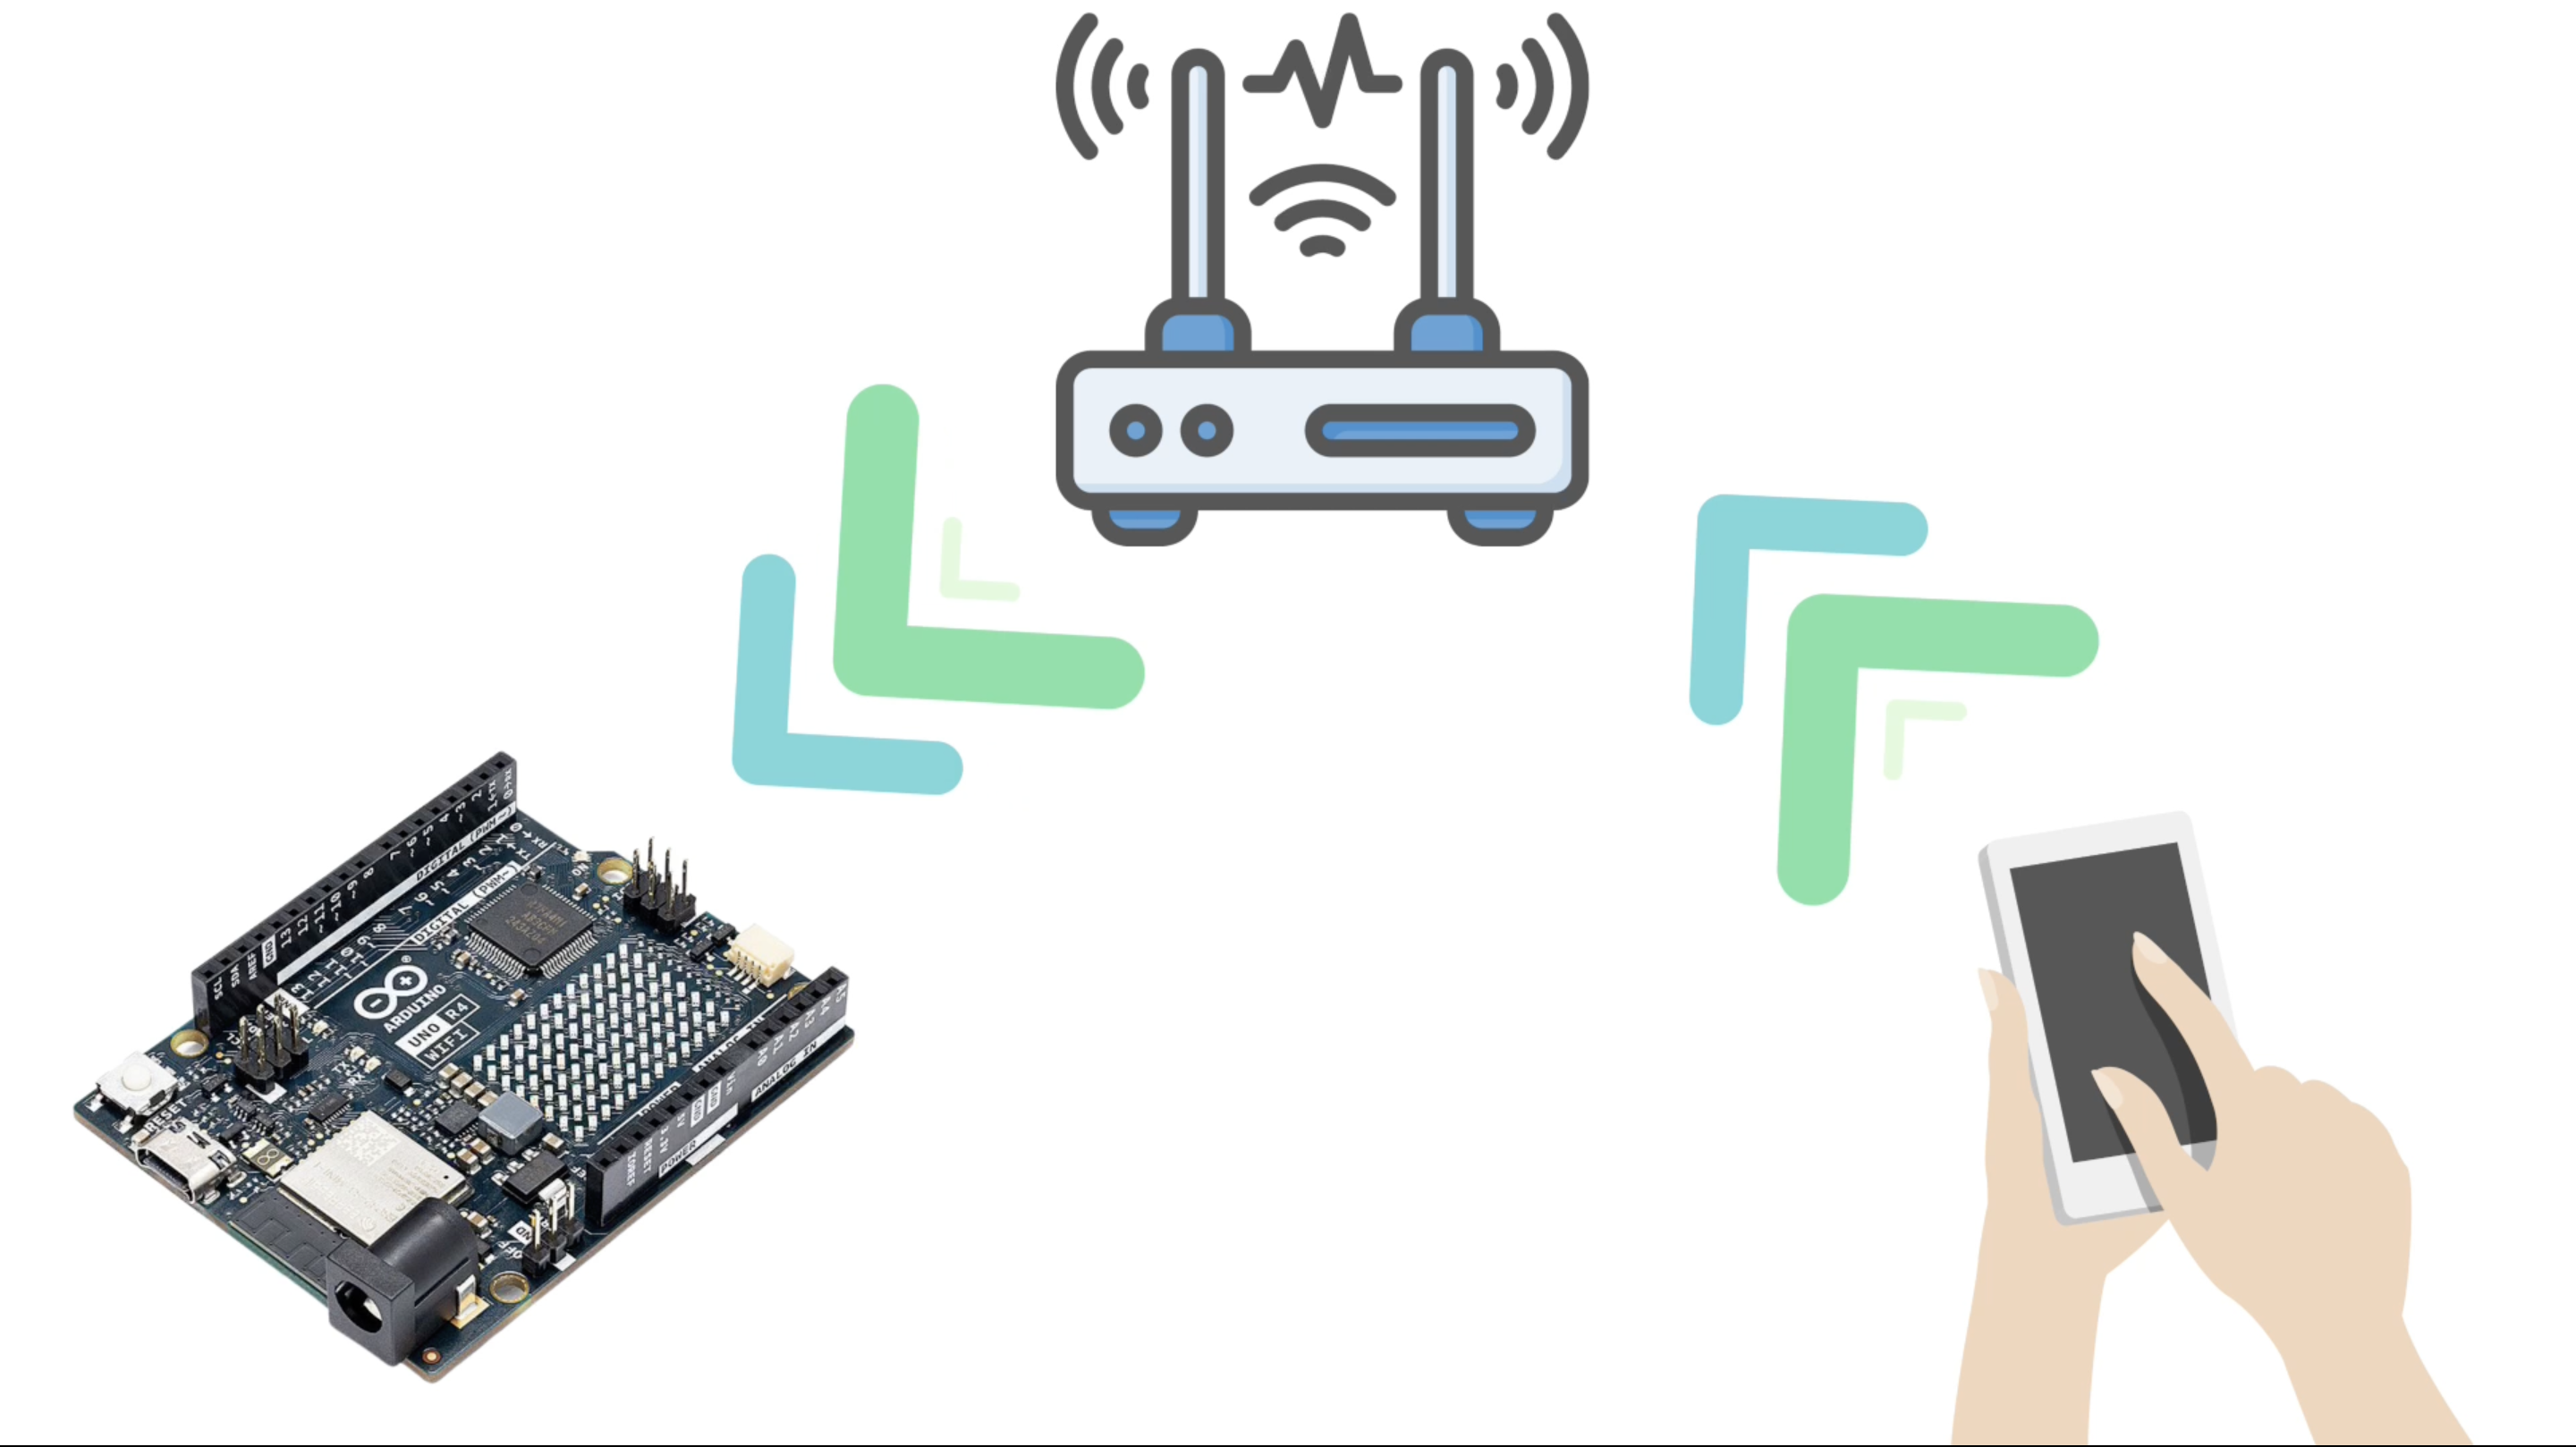 Arduino UNO R4 Minima and WiFi Now Available!